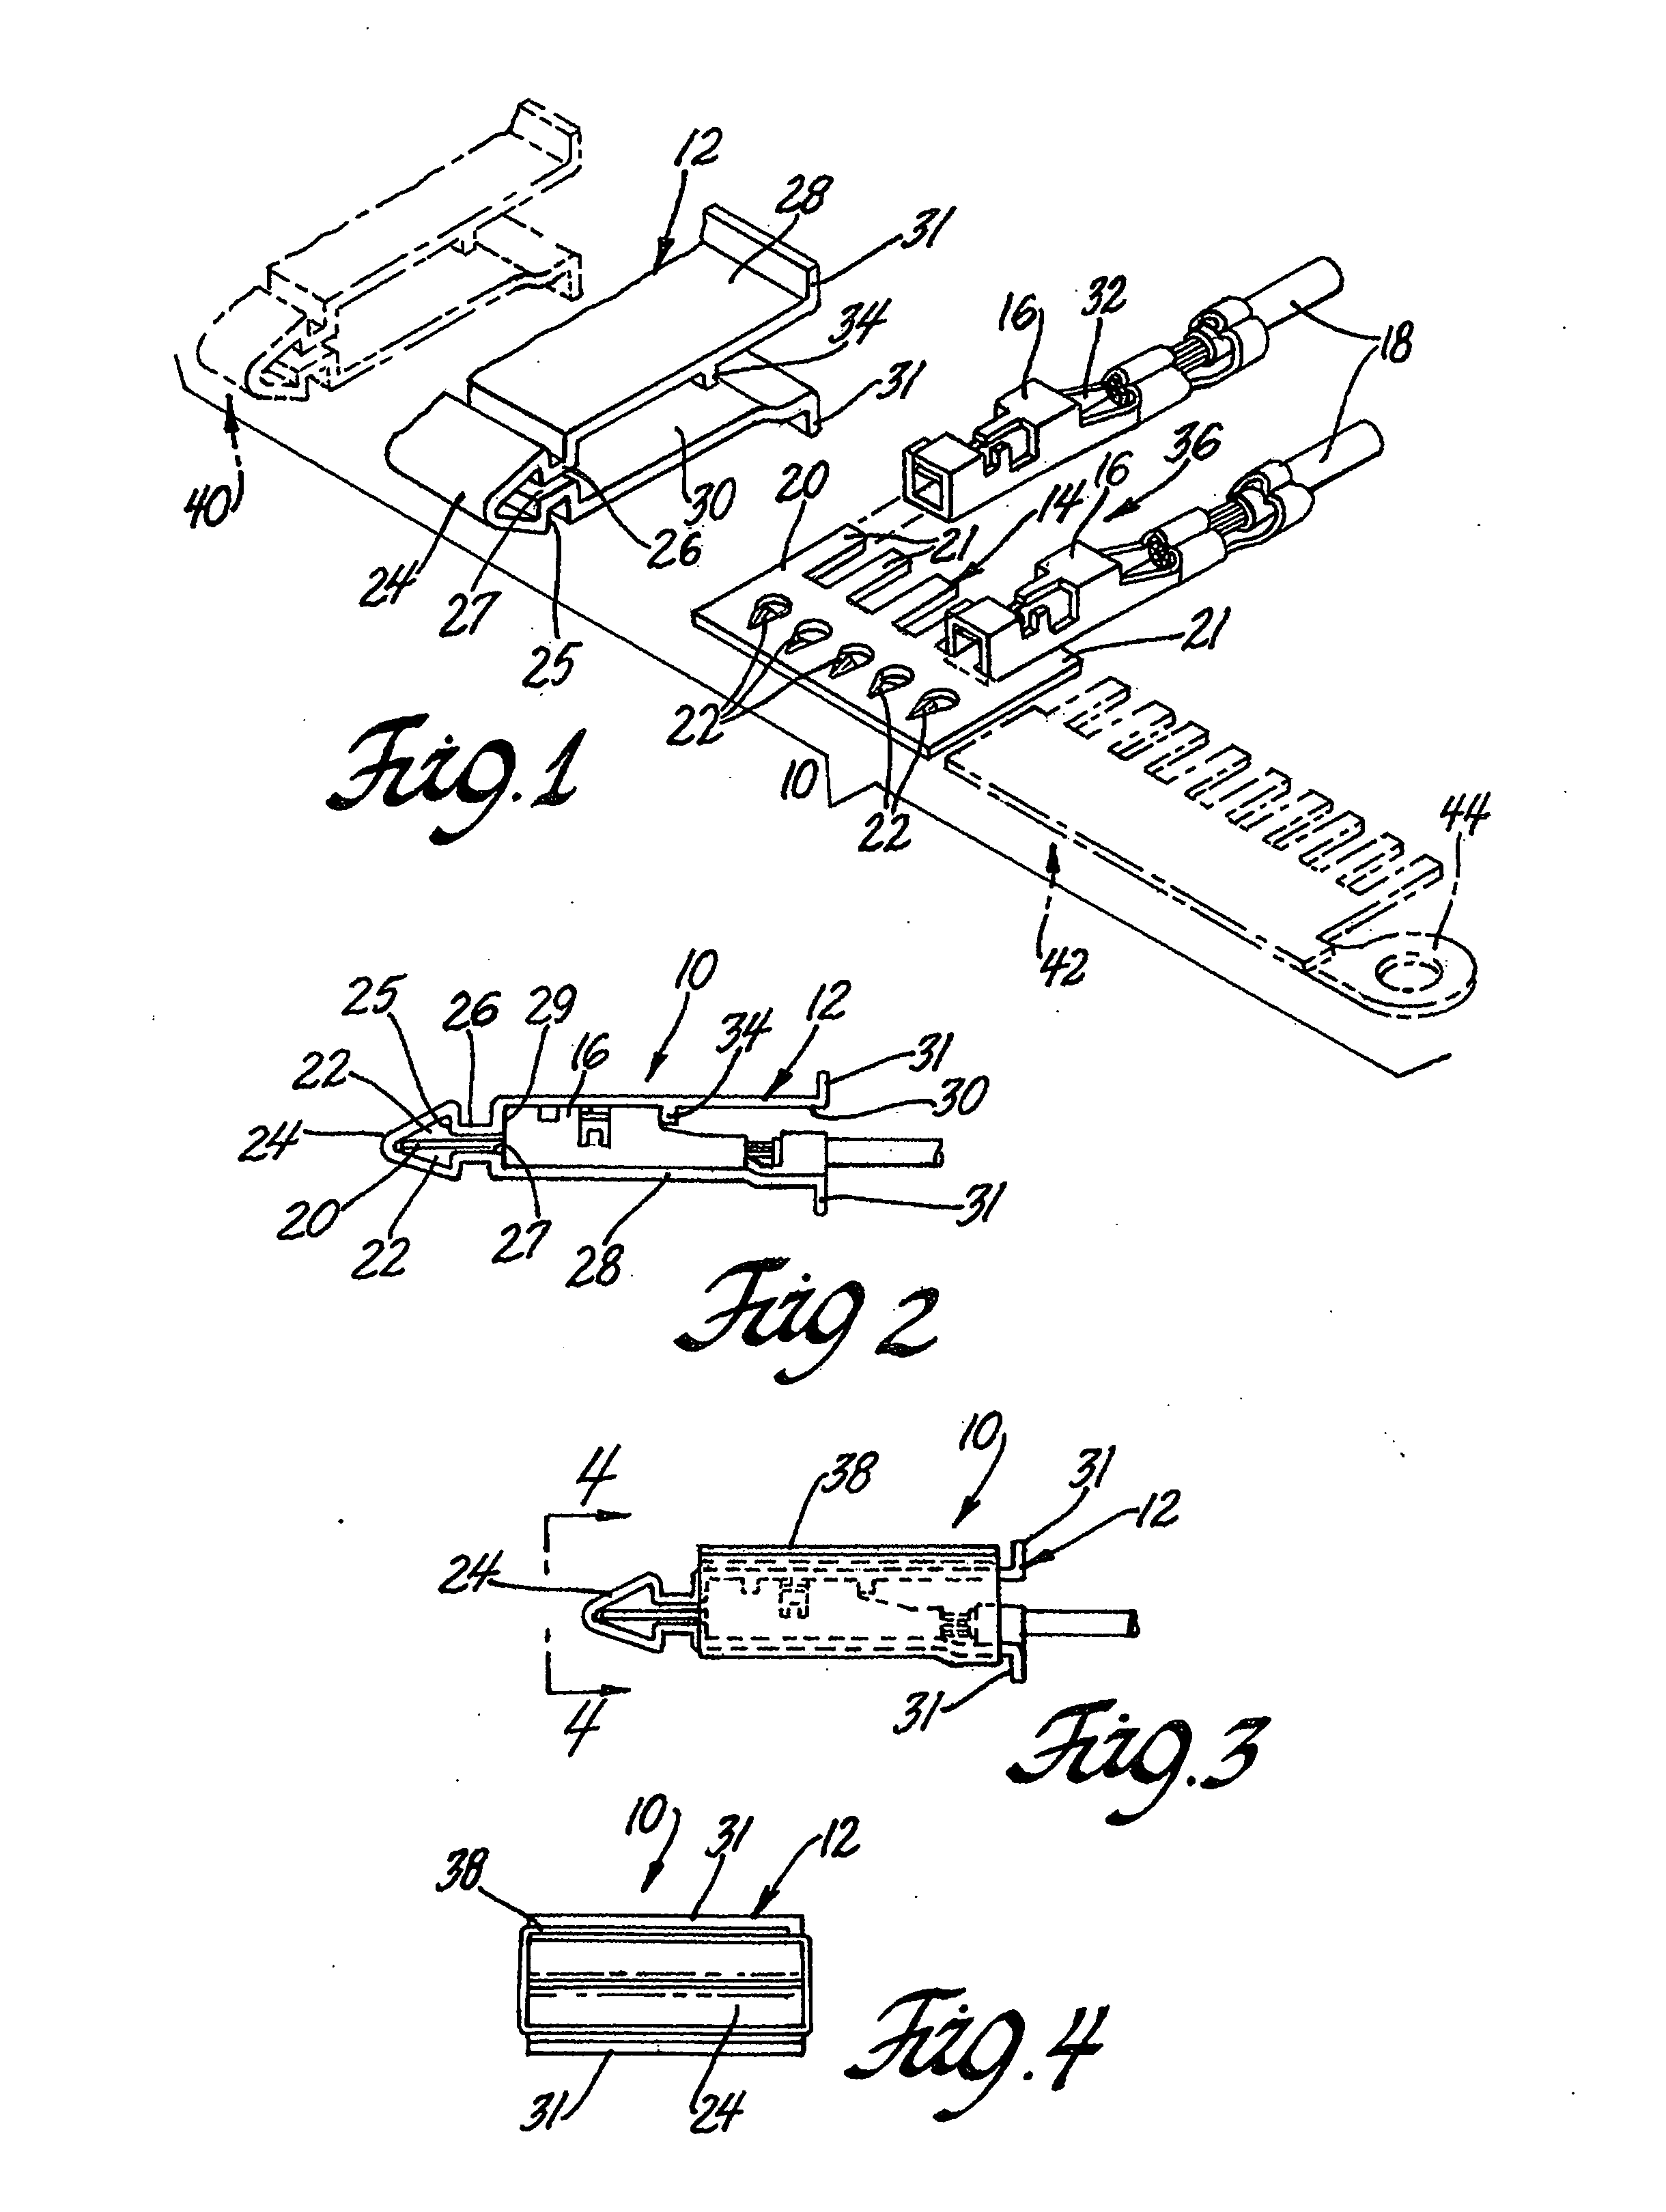 Electrical splice assembly